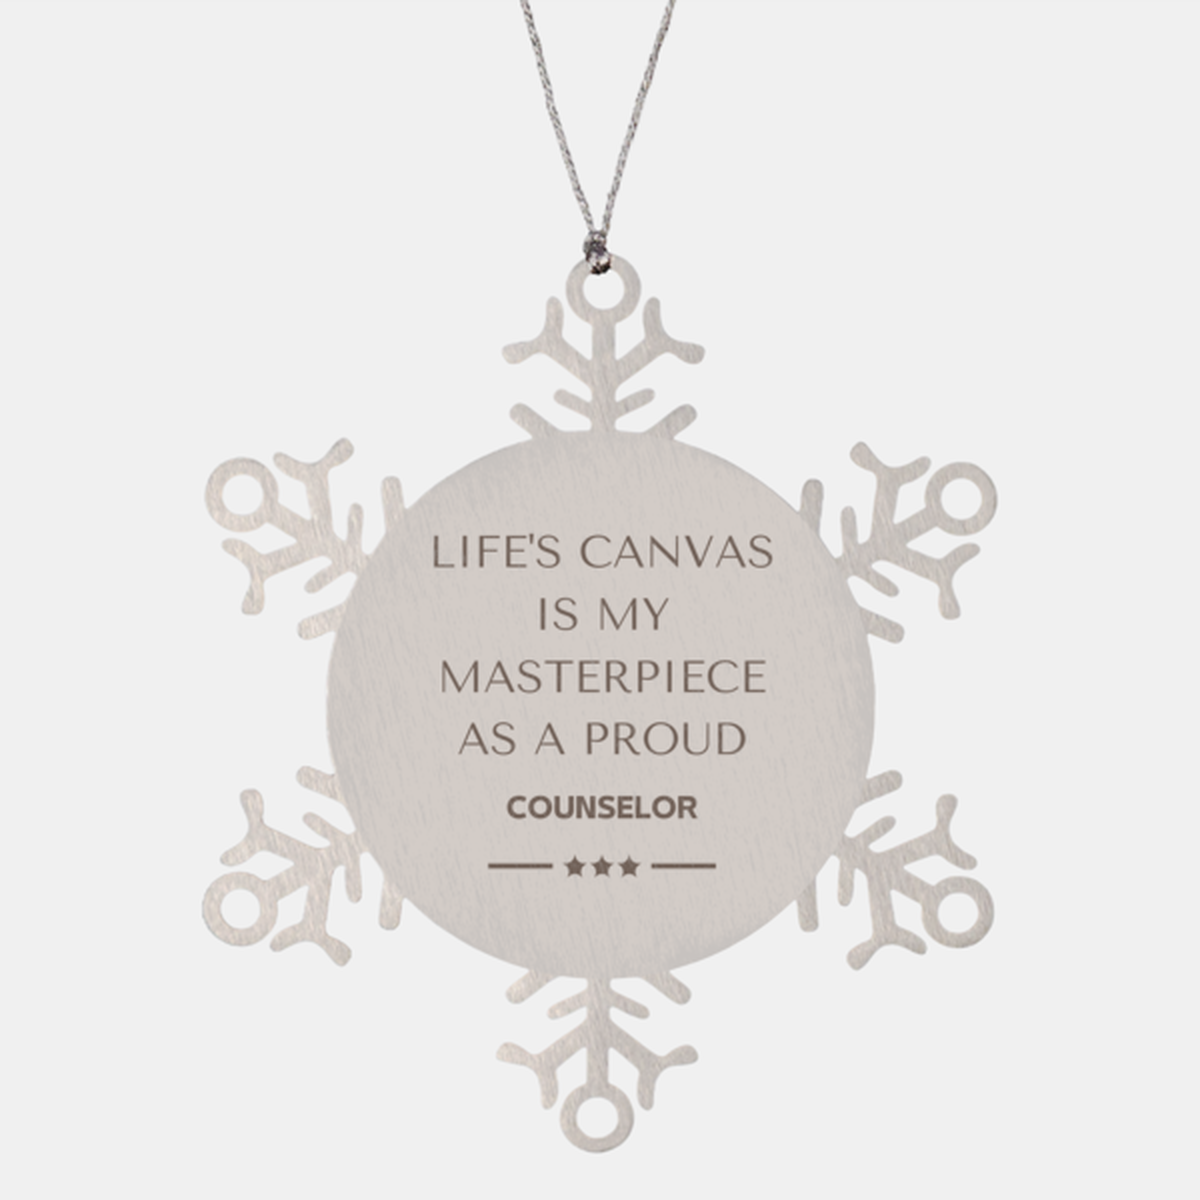 Proud Counselor Gifts, Life's canvas is my masterpiece, Epic Birthday Christmas Unique Snowflake Ornament For Counselor, Coworkers, Men, Women, Friends